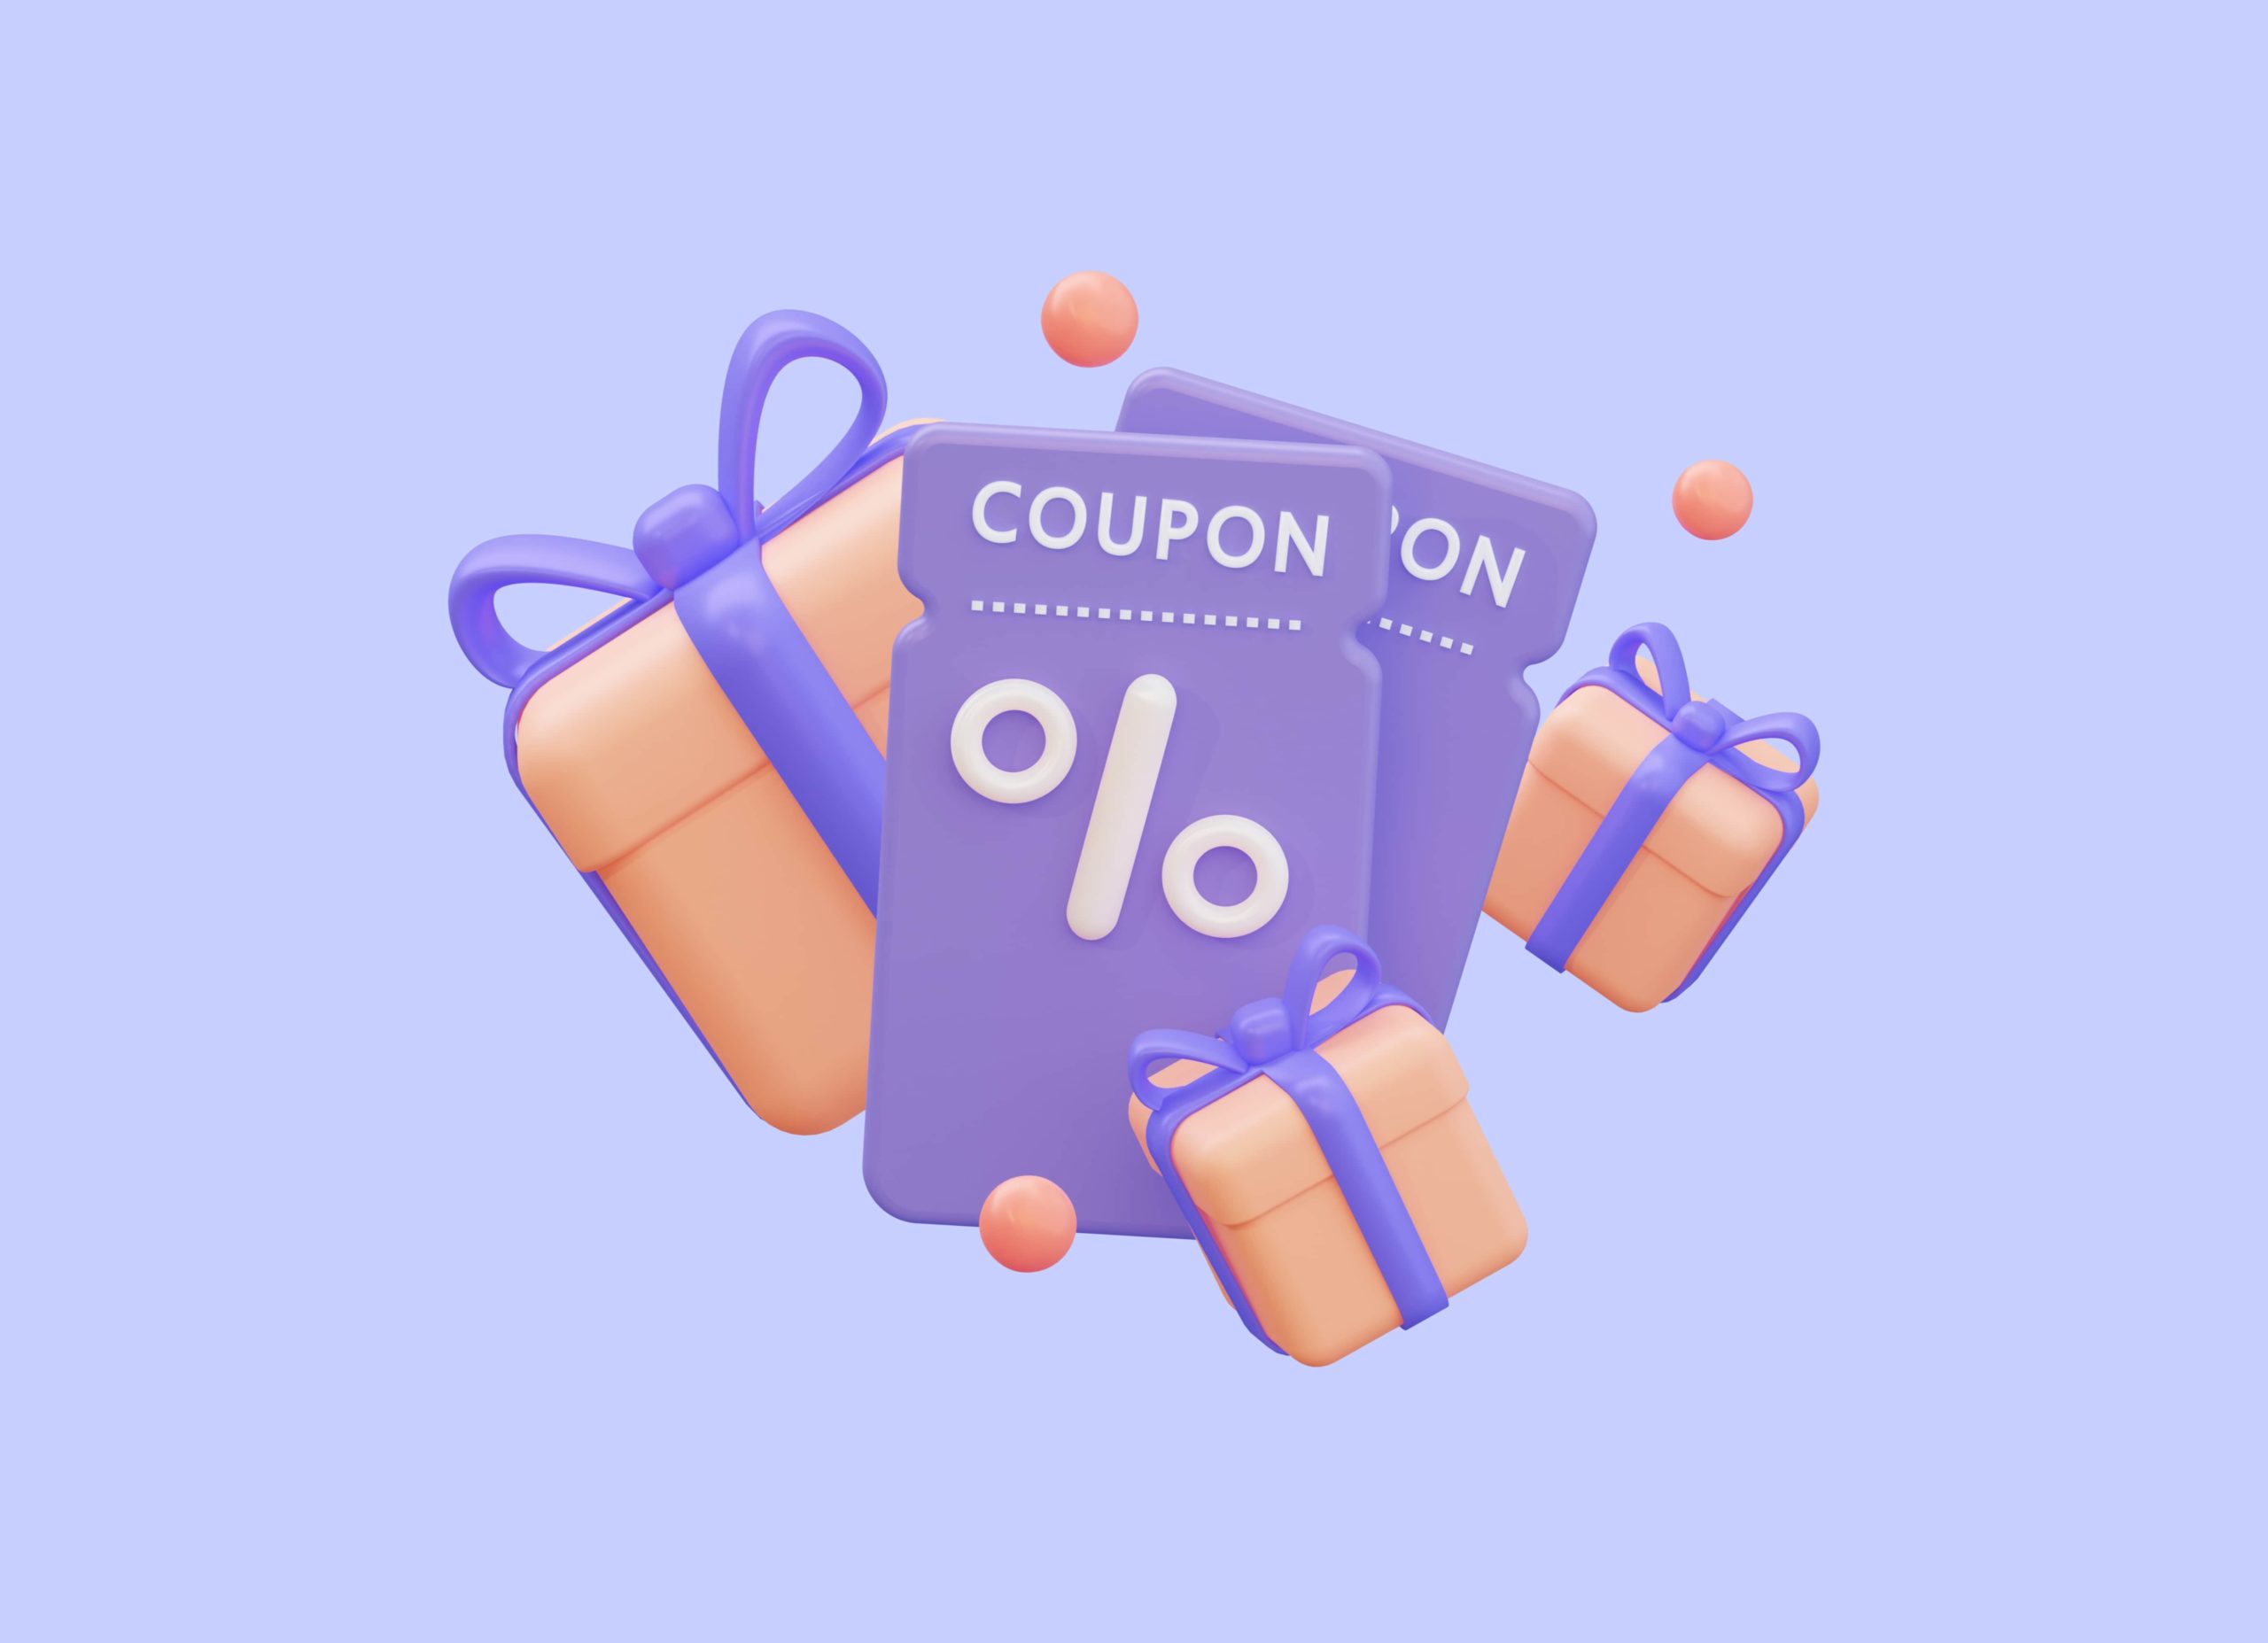 6 Tips To Make Promo Codes Work - SaleCycle